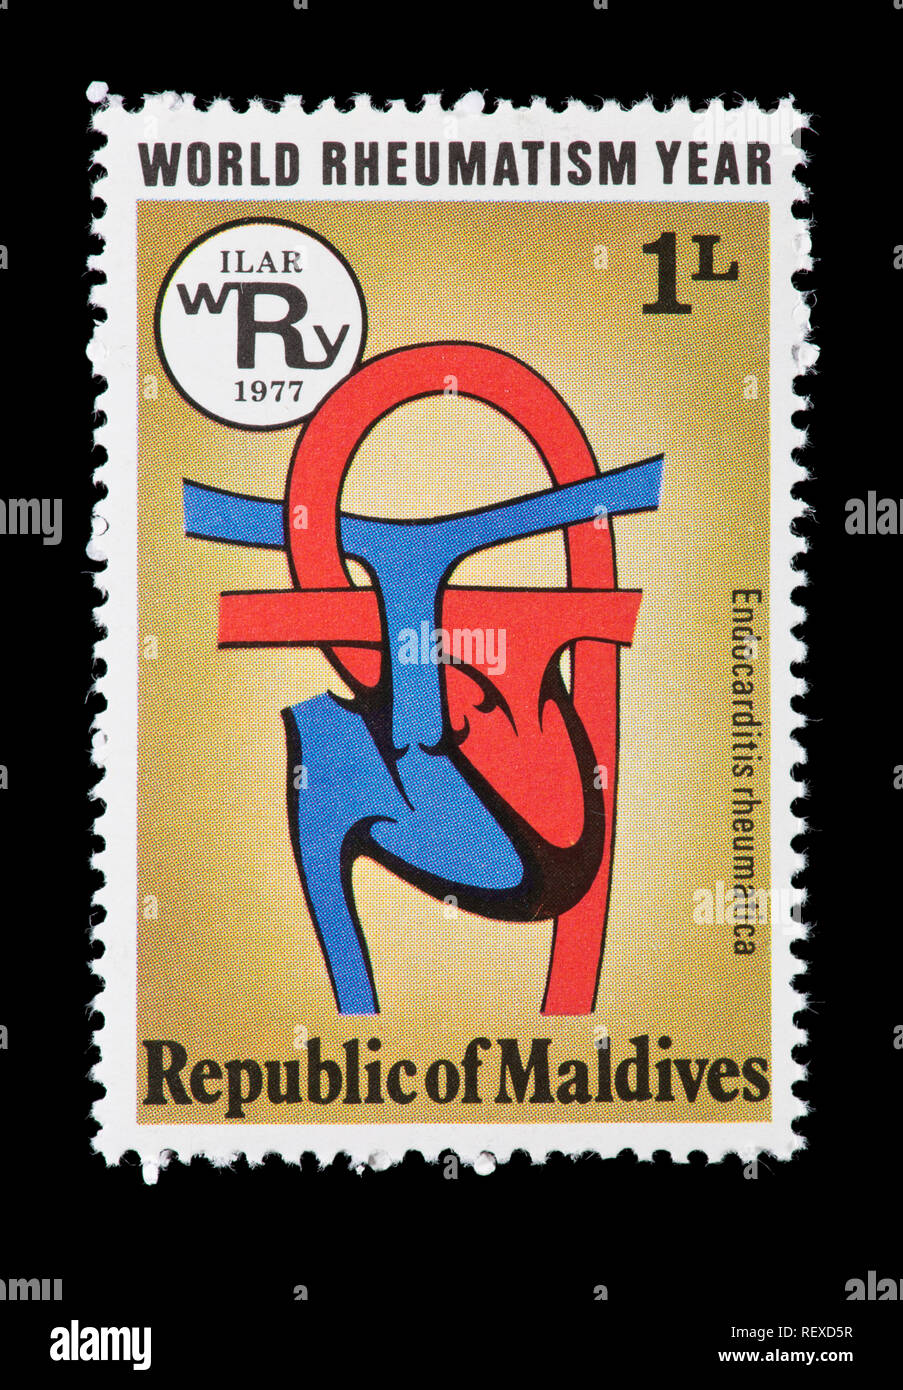 Postage stamp from the Maldives depicting a rheumatic heart, issued for the World Rheumatism Year. Stock Photo